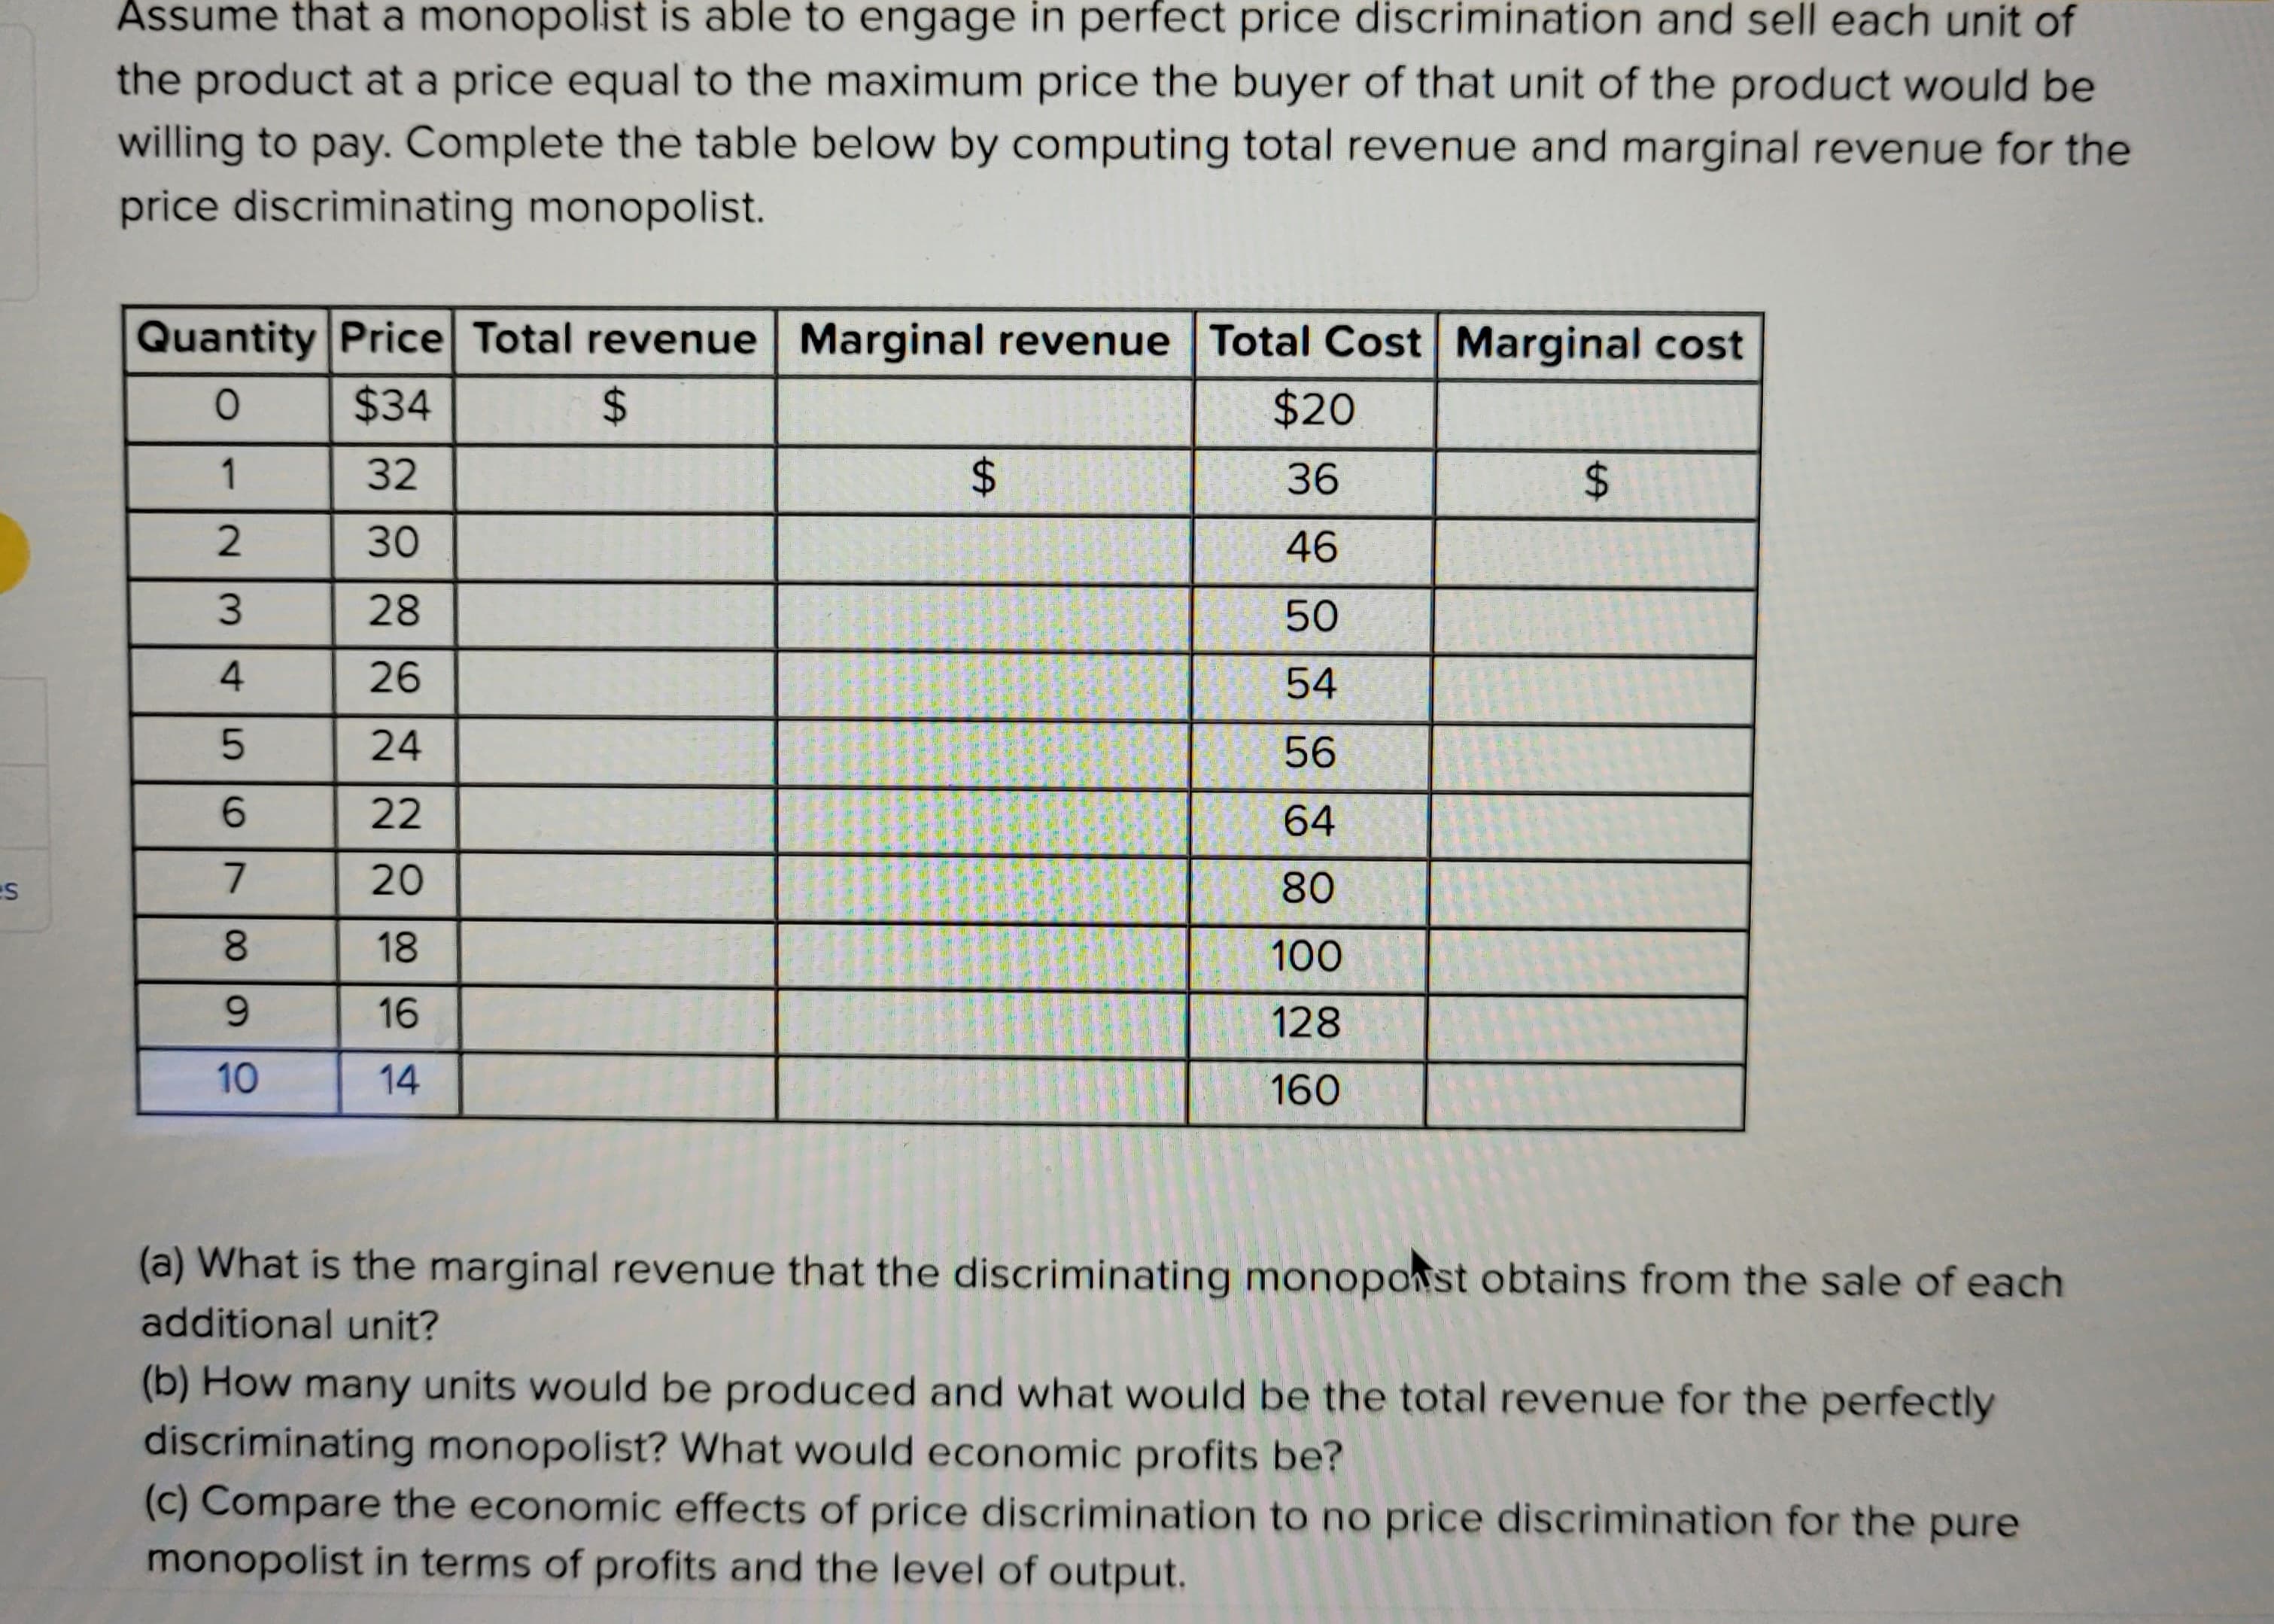 s
Assume that a monopolist is able to engage in perfect price discrimination and sell each unit of
the product at a price equal to the maximum price the buyer of that unit of the product would be
willing to pay. Complete the table below by computing total revenue and marginal revenue for the
price discriminating monopolist.
Quantity Price Total revenue Marginal revenue Total Cost Marginal cost
0
$34
$
1
32
30
28
26
24
22
20
18
16
14
234SSN
5
6
7
89
10
$
$20
36
46
50
54
56
64
80
100
128
160
$
(a) What is the marginal revenue that the discriminating monopost obtains from the sale of each
additional unit?
(b) How many units would be produced and what would be the total revenue for the perfectly
discriminating monopolist? What would economic profits be?
(c) Compare the economic effects of price discrimination to no price discrimination for the pure
monopolist in terms of profits and the level of output.